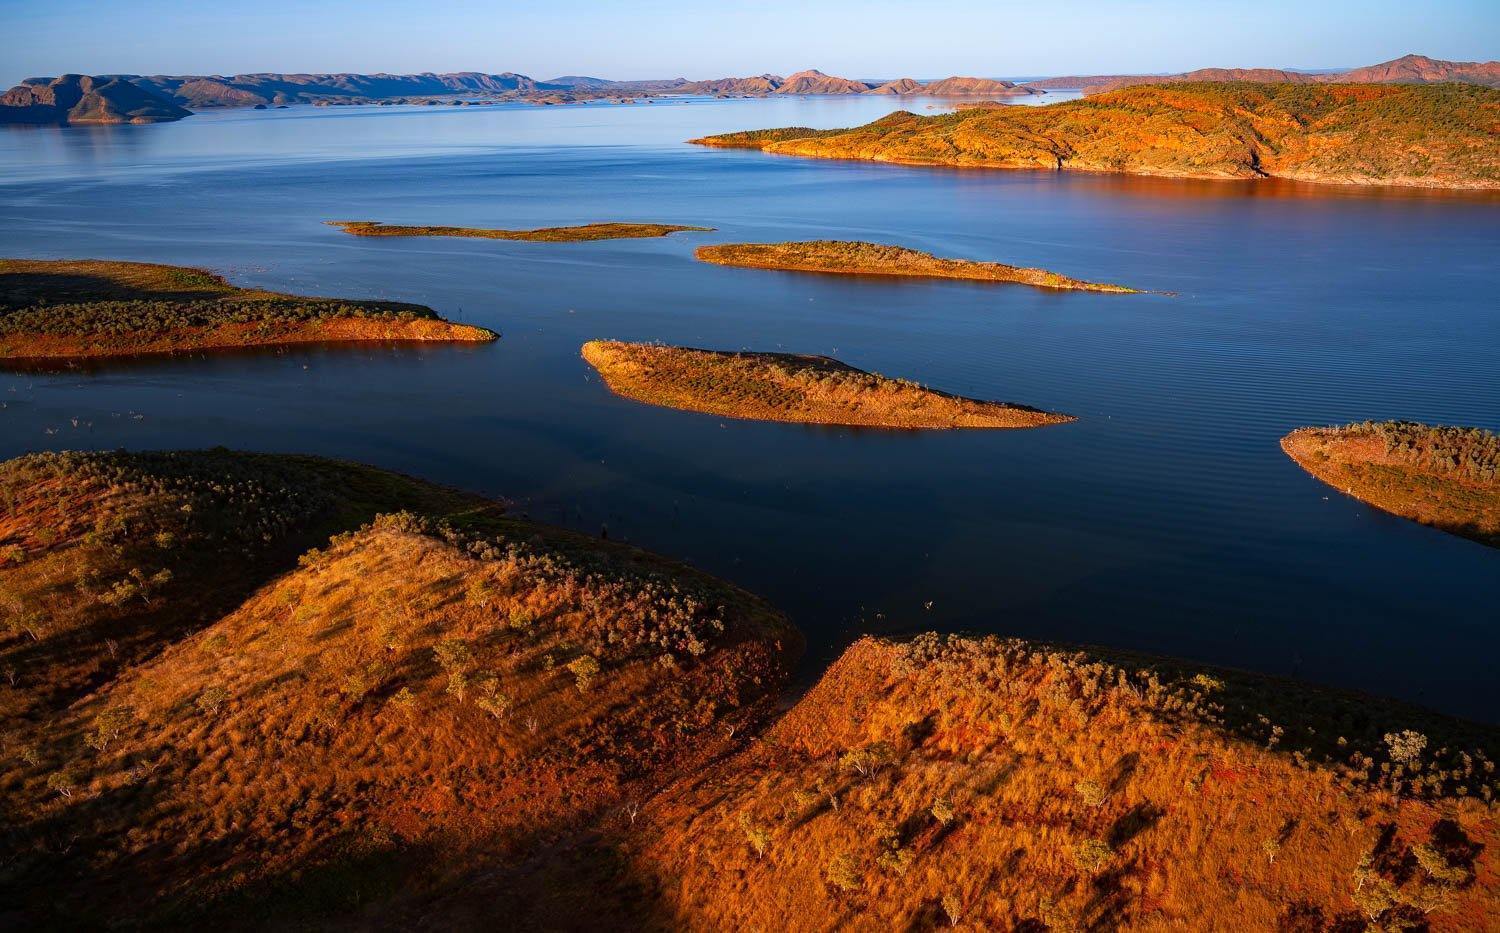 Large mountains walls and a lake in between with some rocky islands, Lake Argyle #3 - The Kimberley